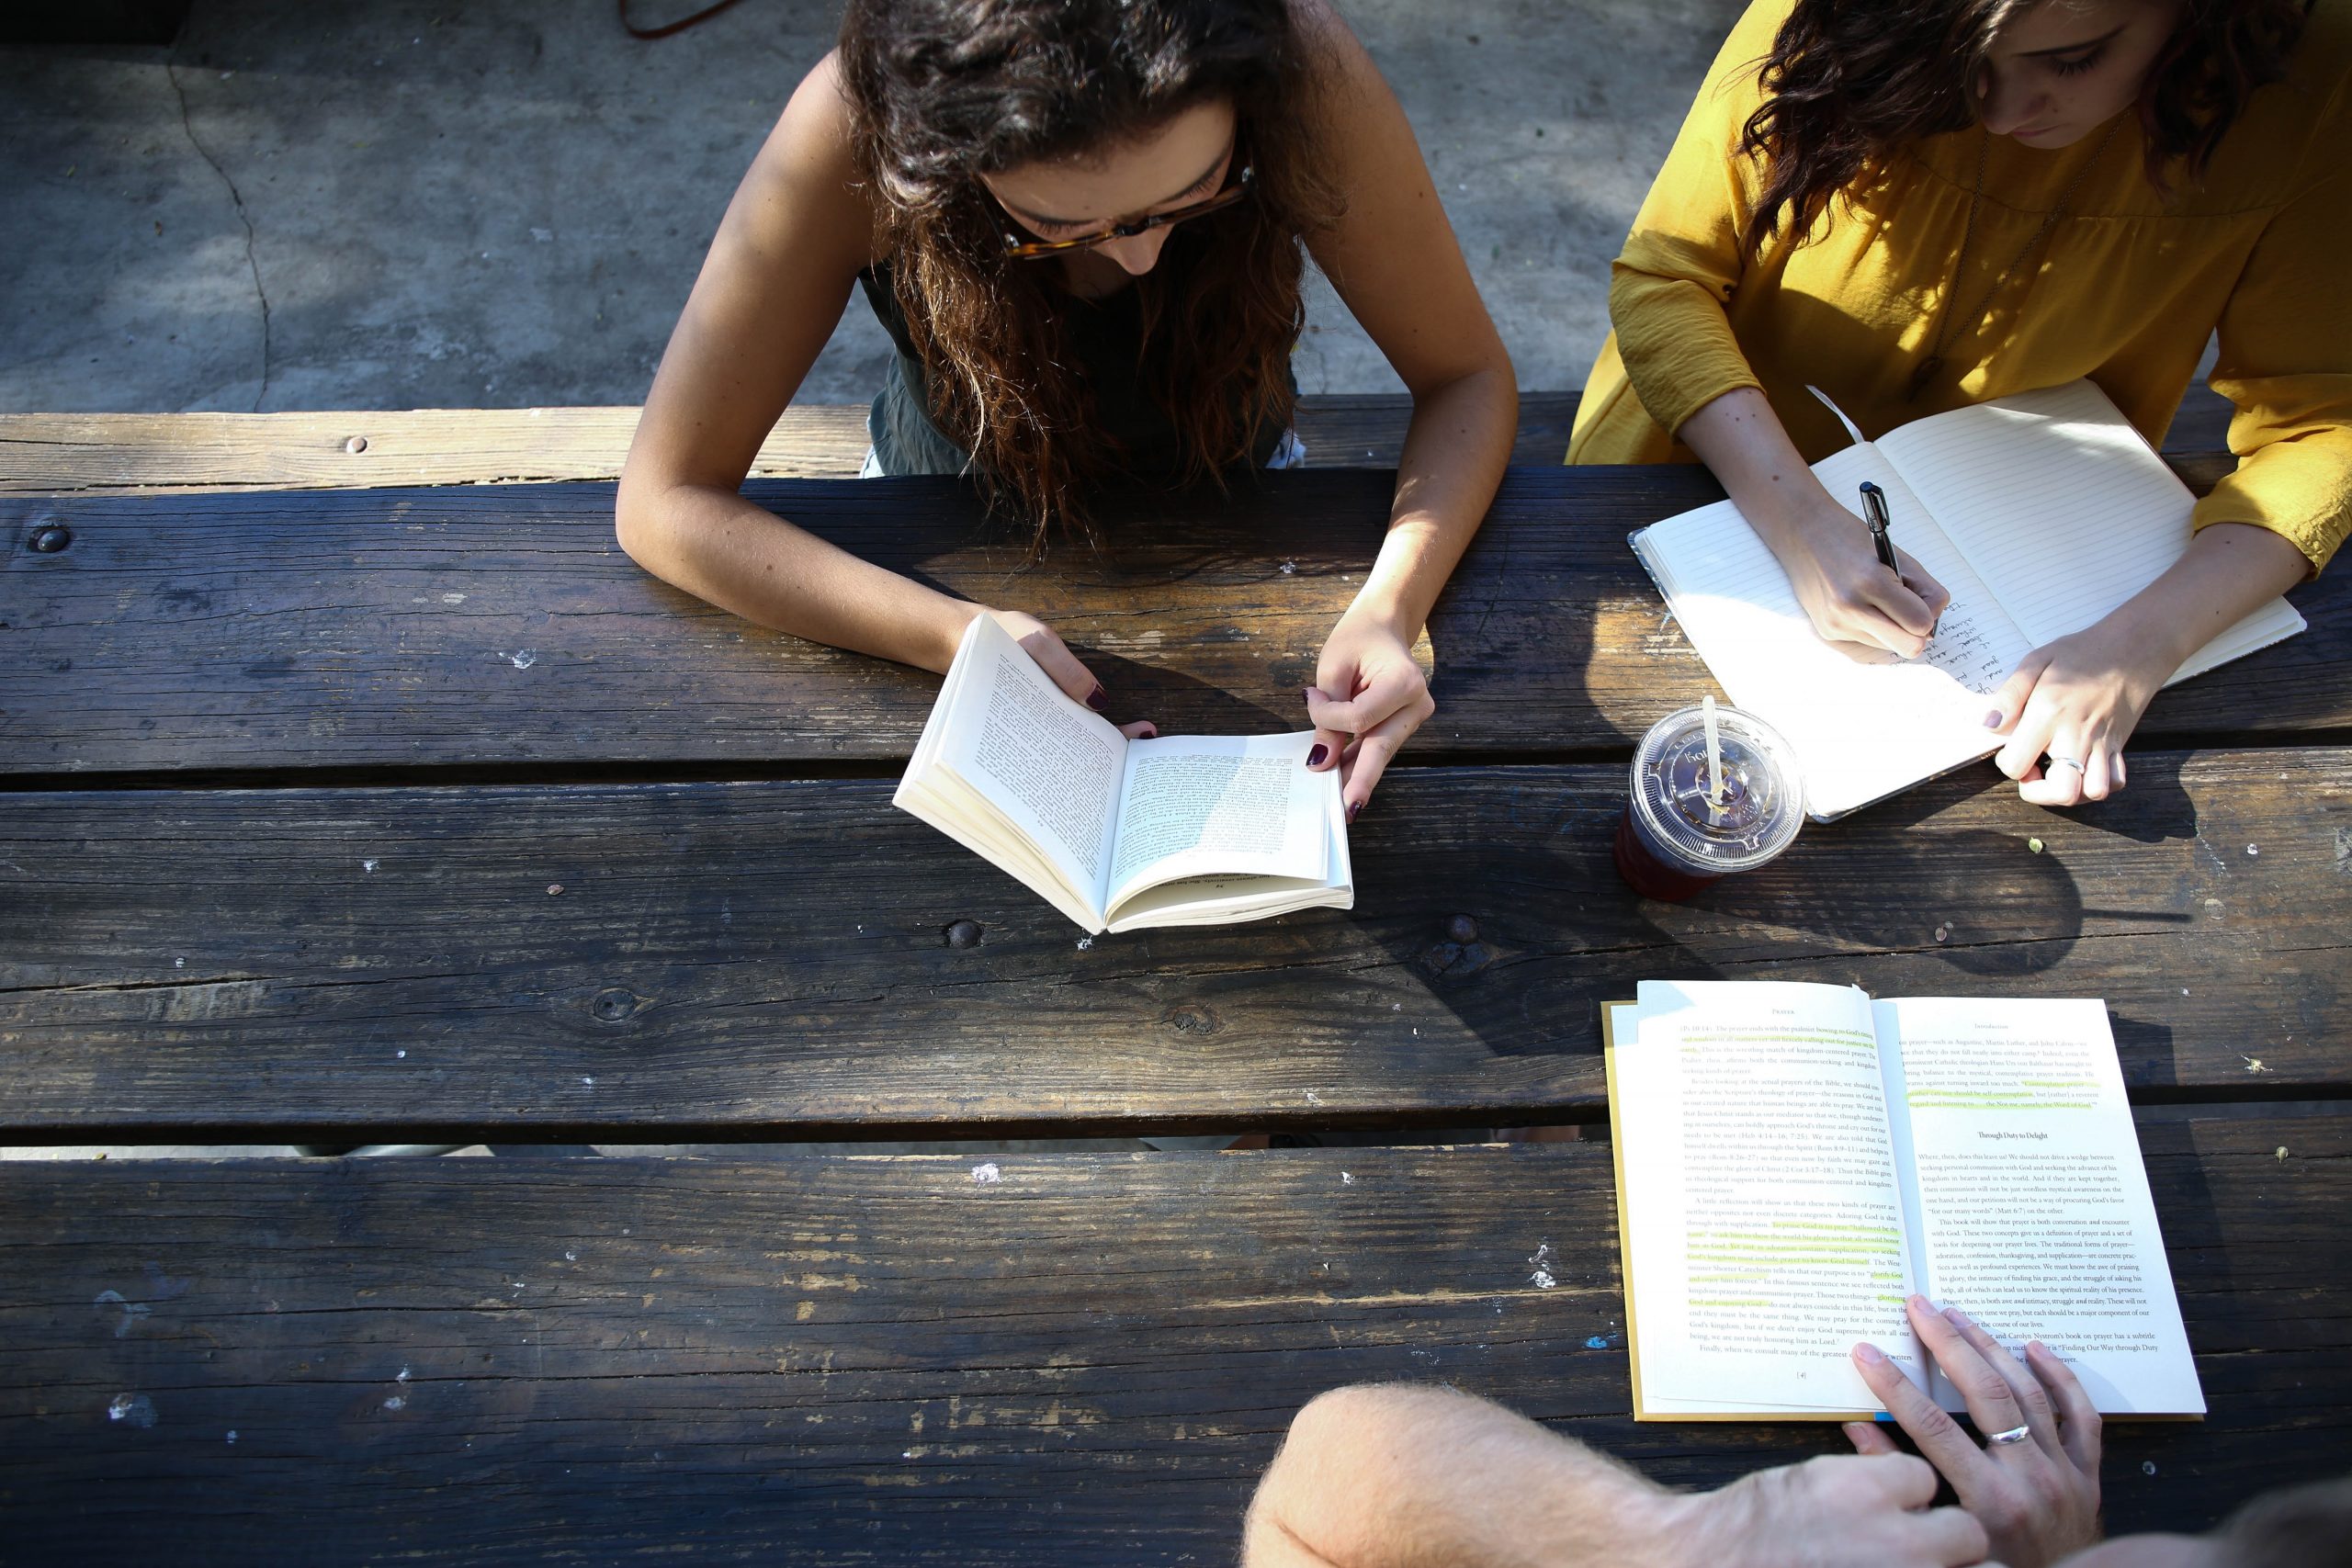 Three people look at books together while seated on an outdoor wooden table